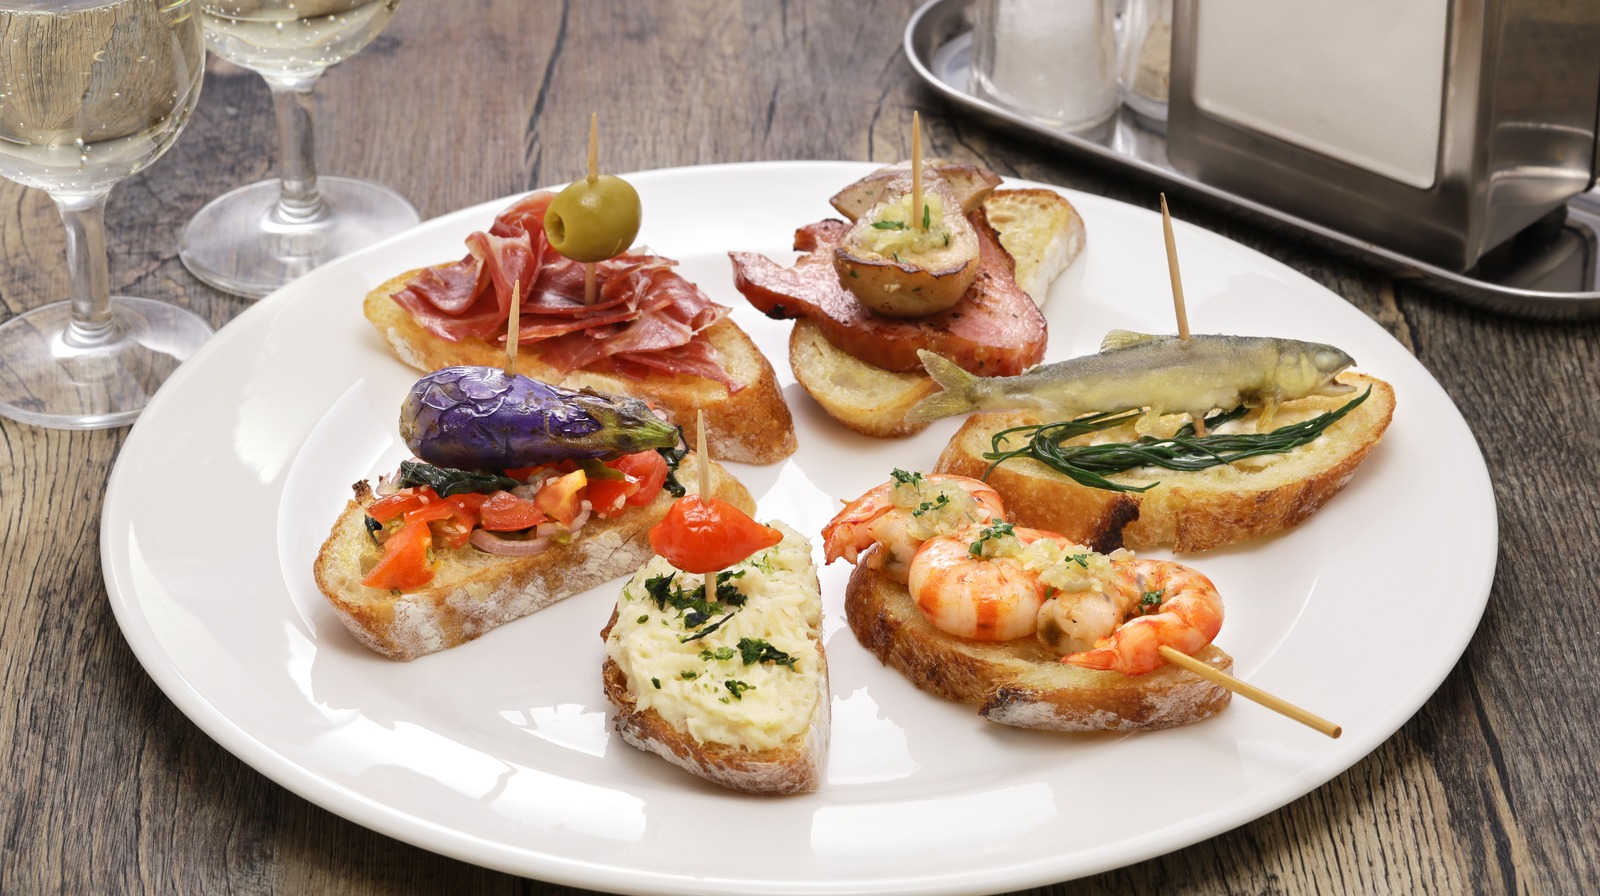 Cicchetti being served on a white plate